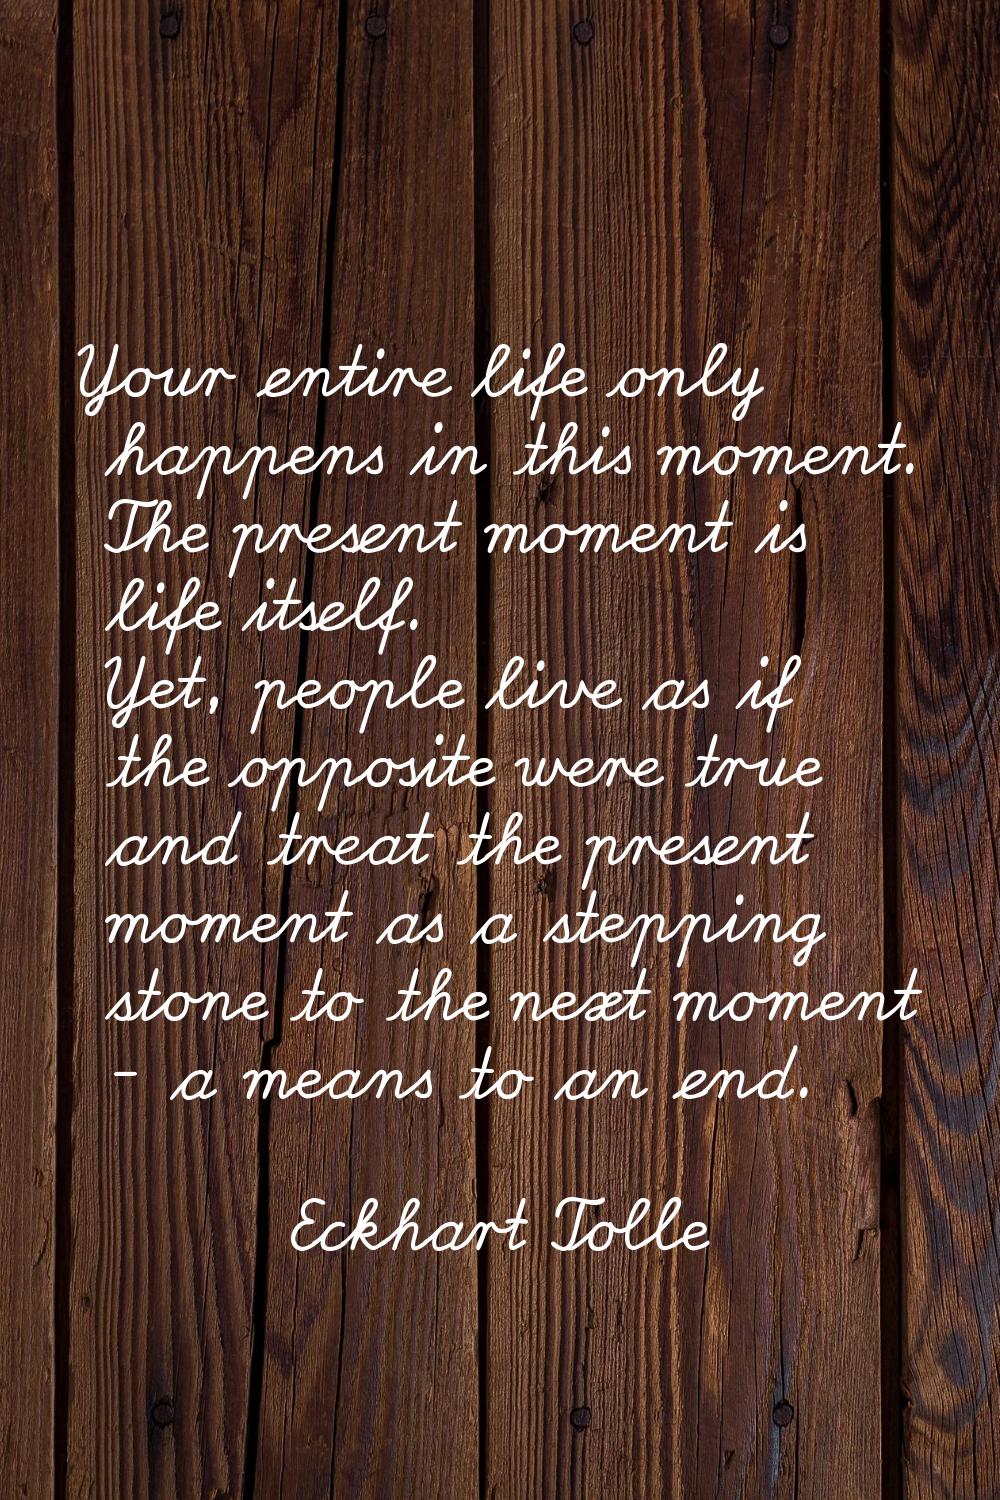 Your entire life only happens in this moment. The present moment is life itself. Yet, people live a